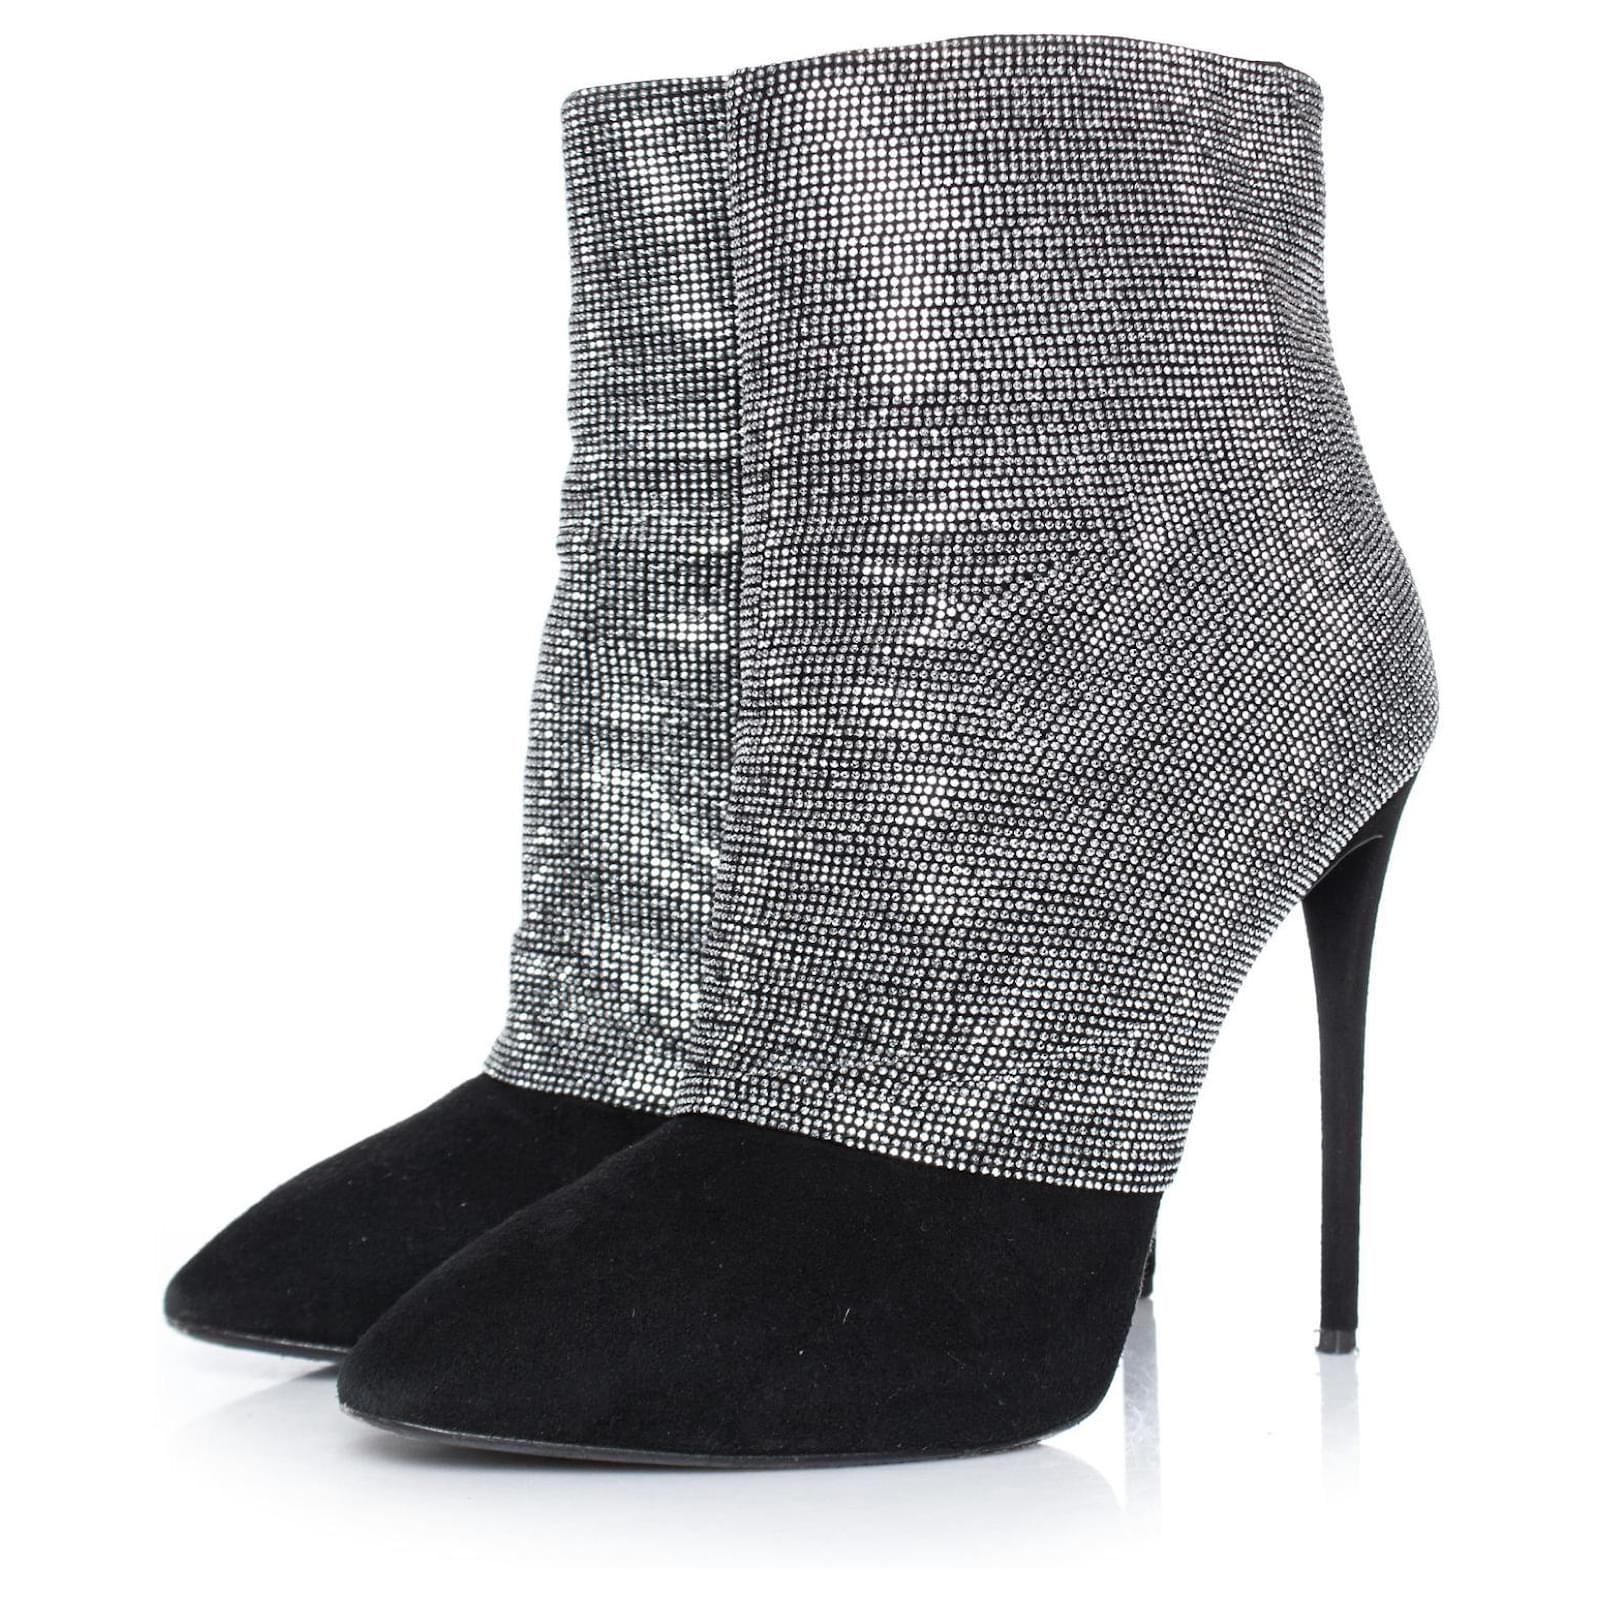 Zanotti, crystal ankle boots Black Suede - Closet